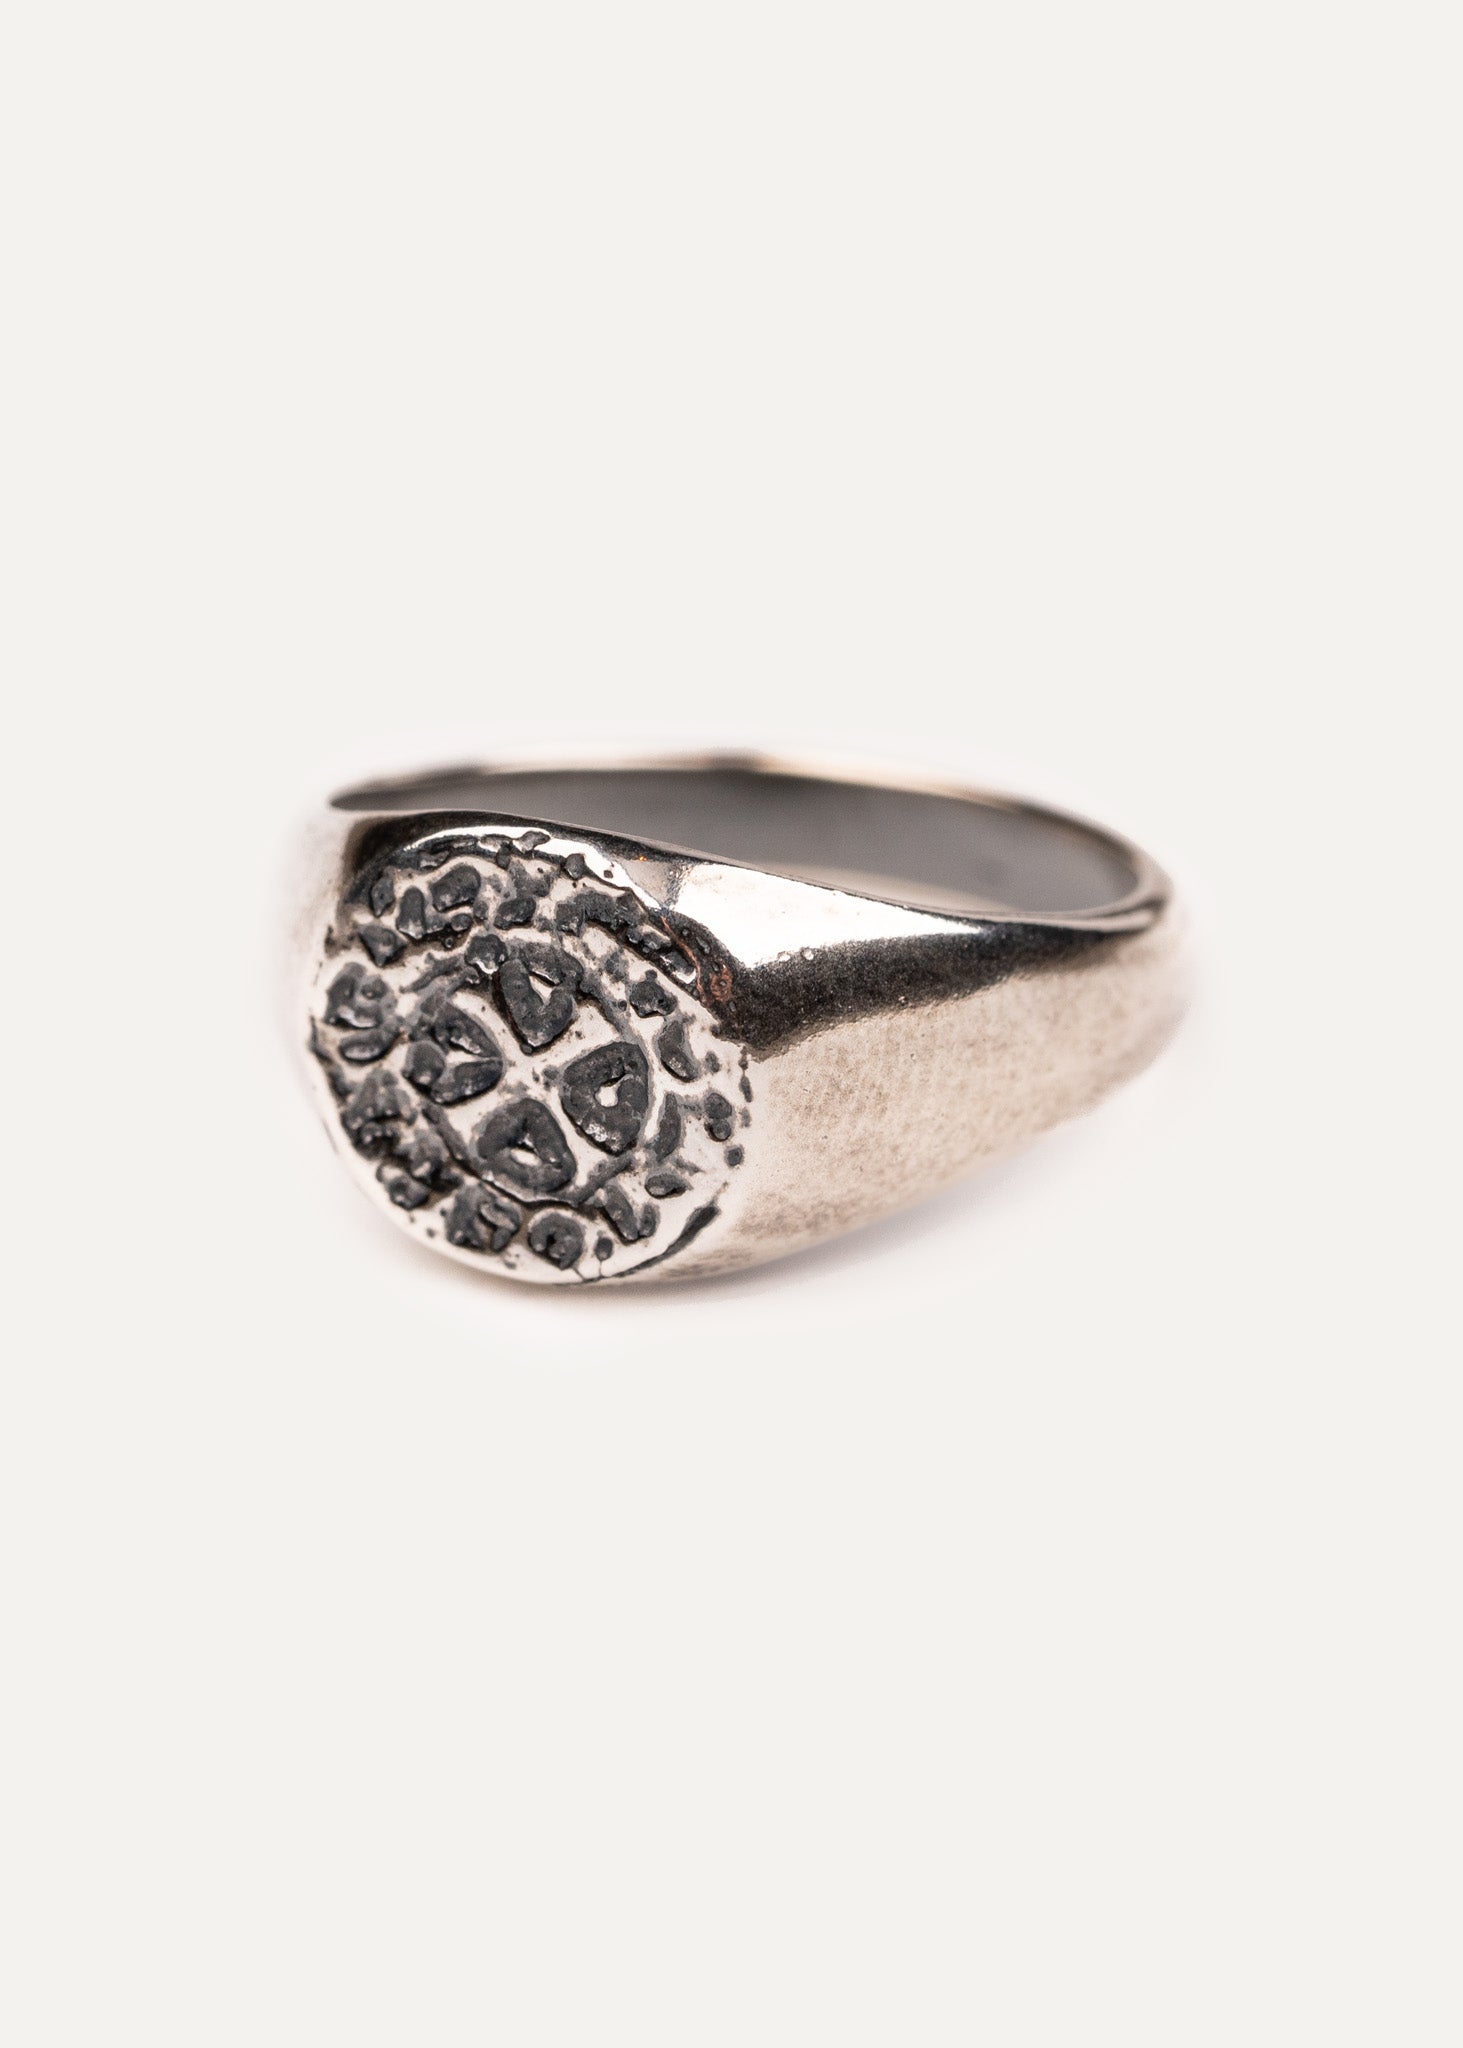 Quarter penny signet ring oxidized silver